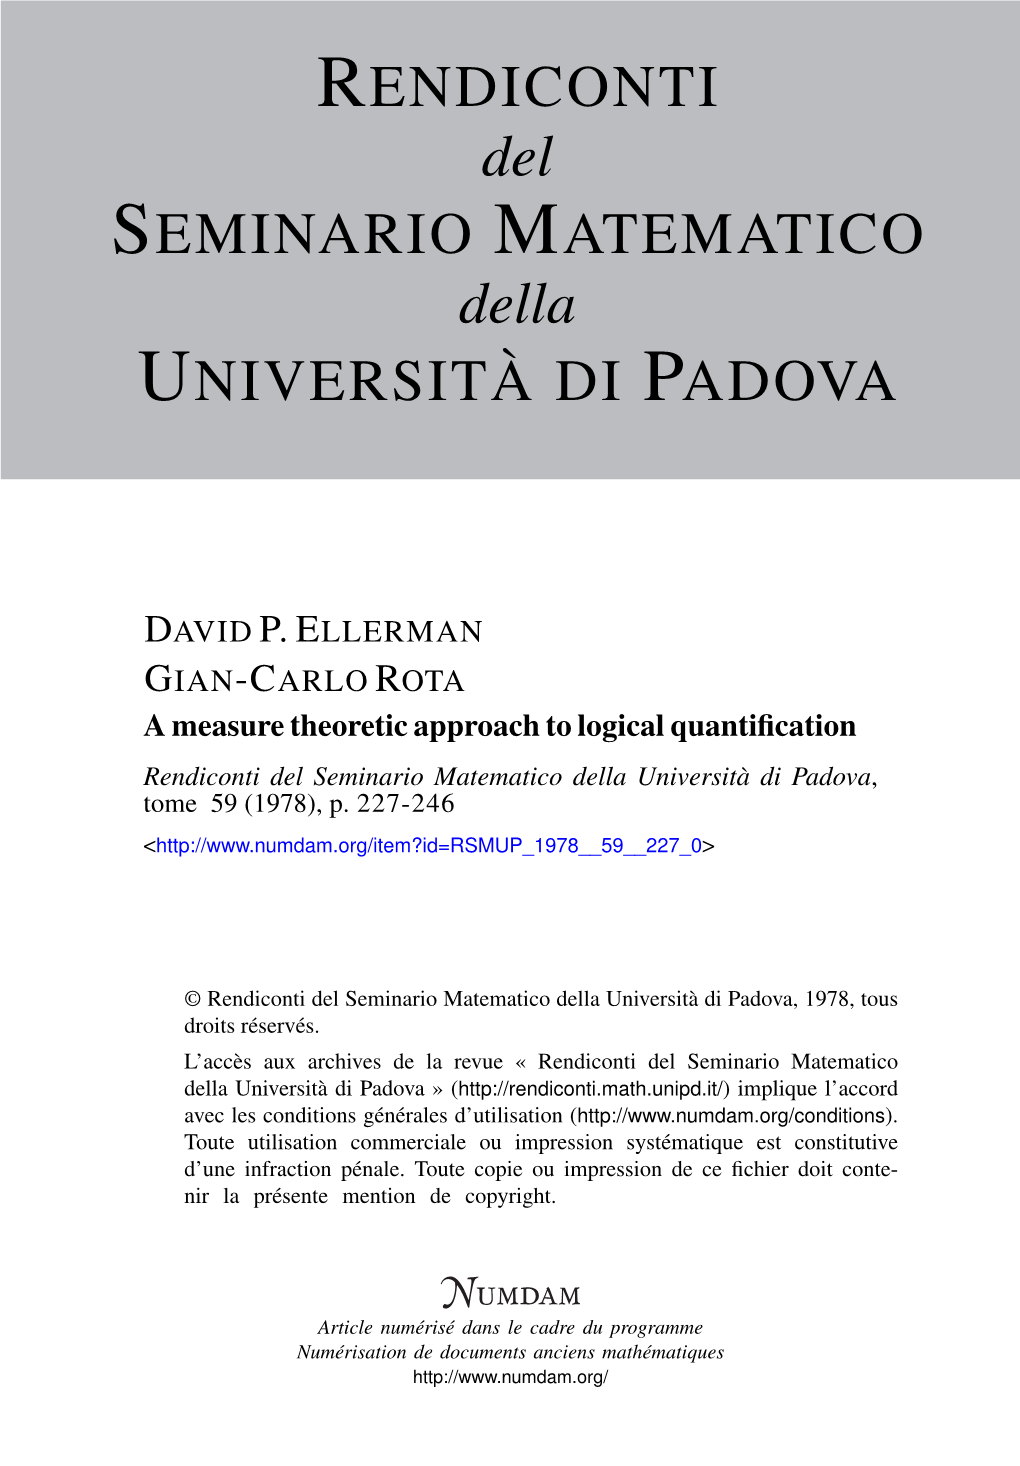 A Measure Theoretic Approach to Logical Quantification